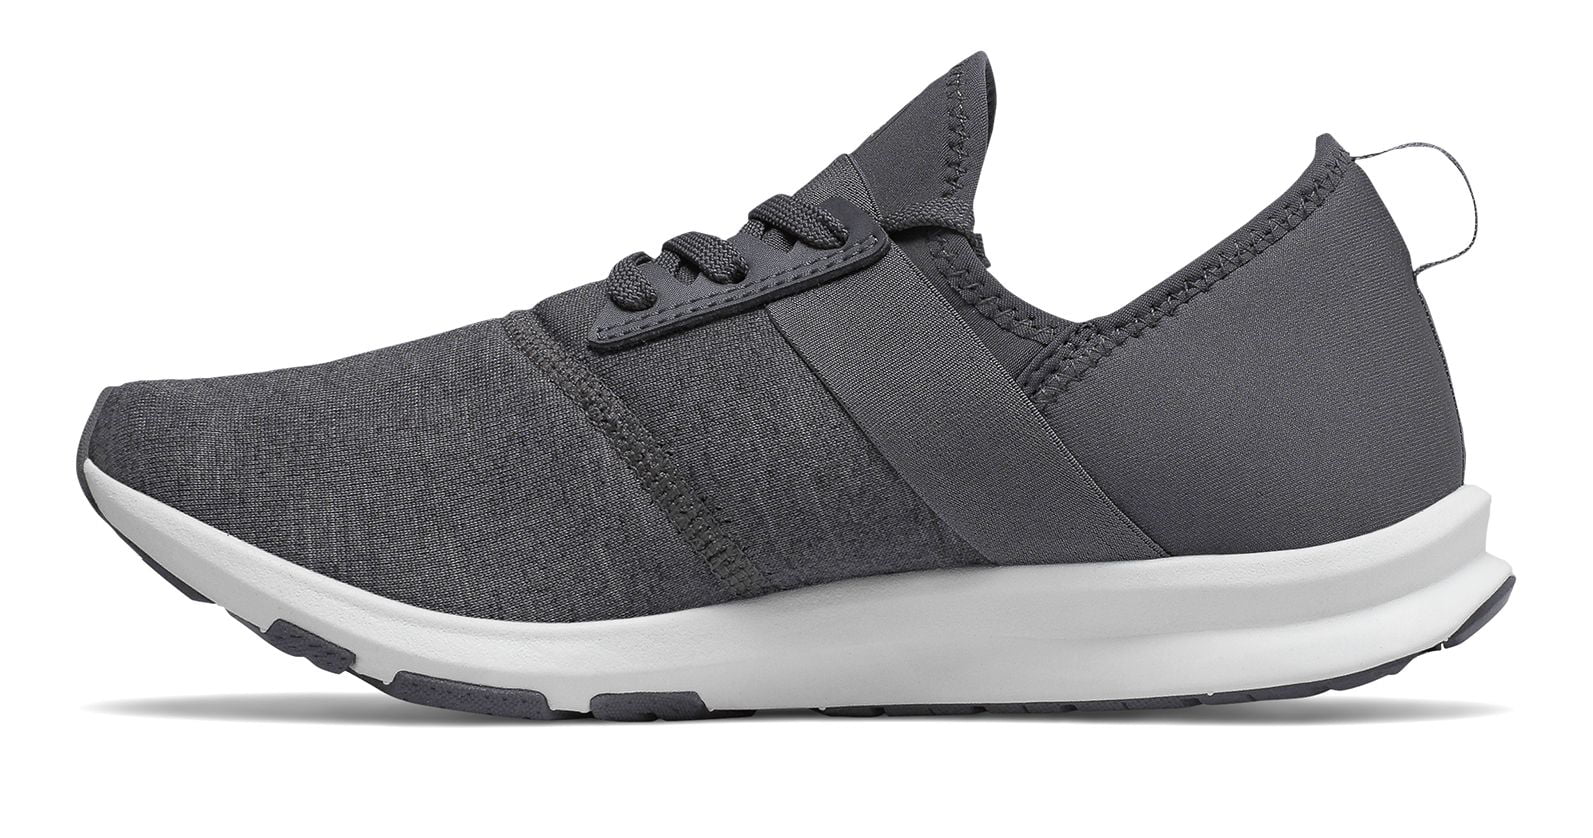 New Balance FuelCore NERGIZE Black with White - Walmart.com